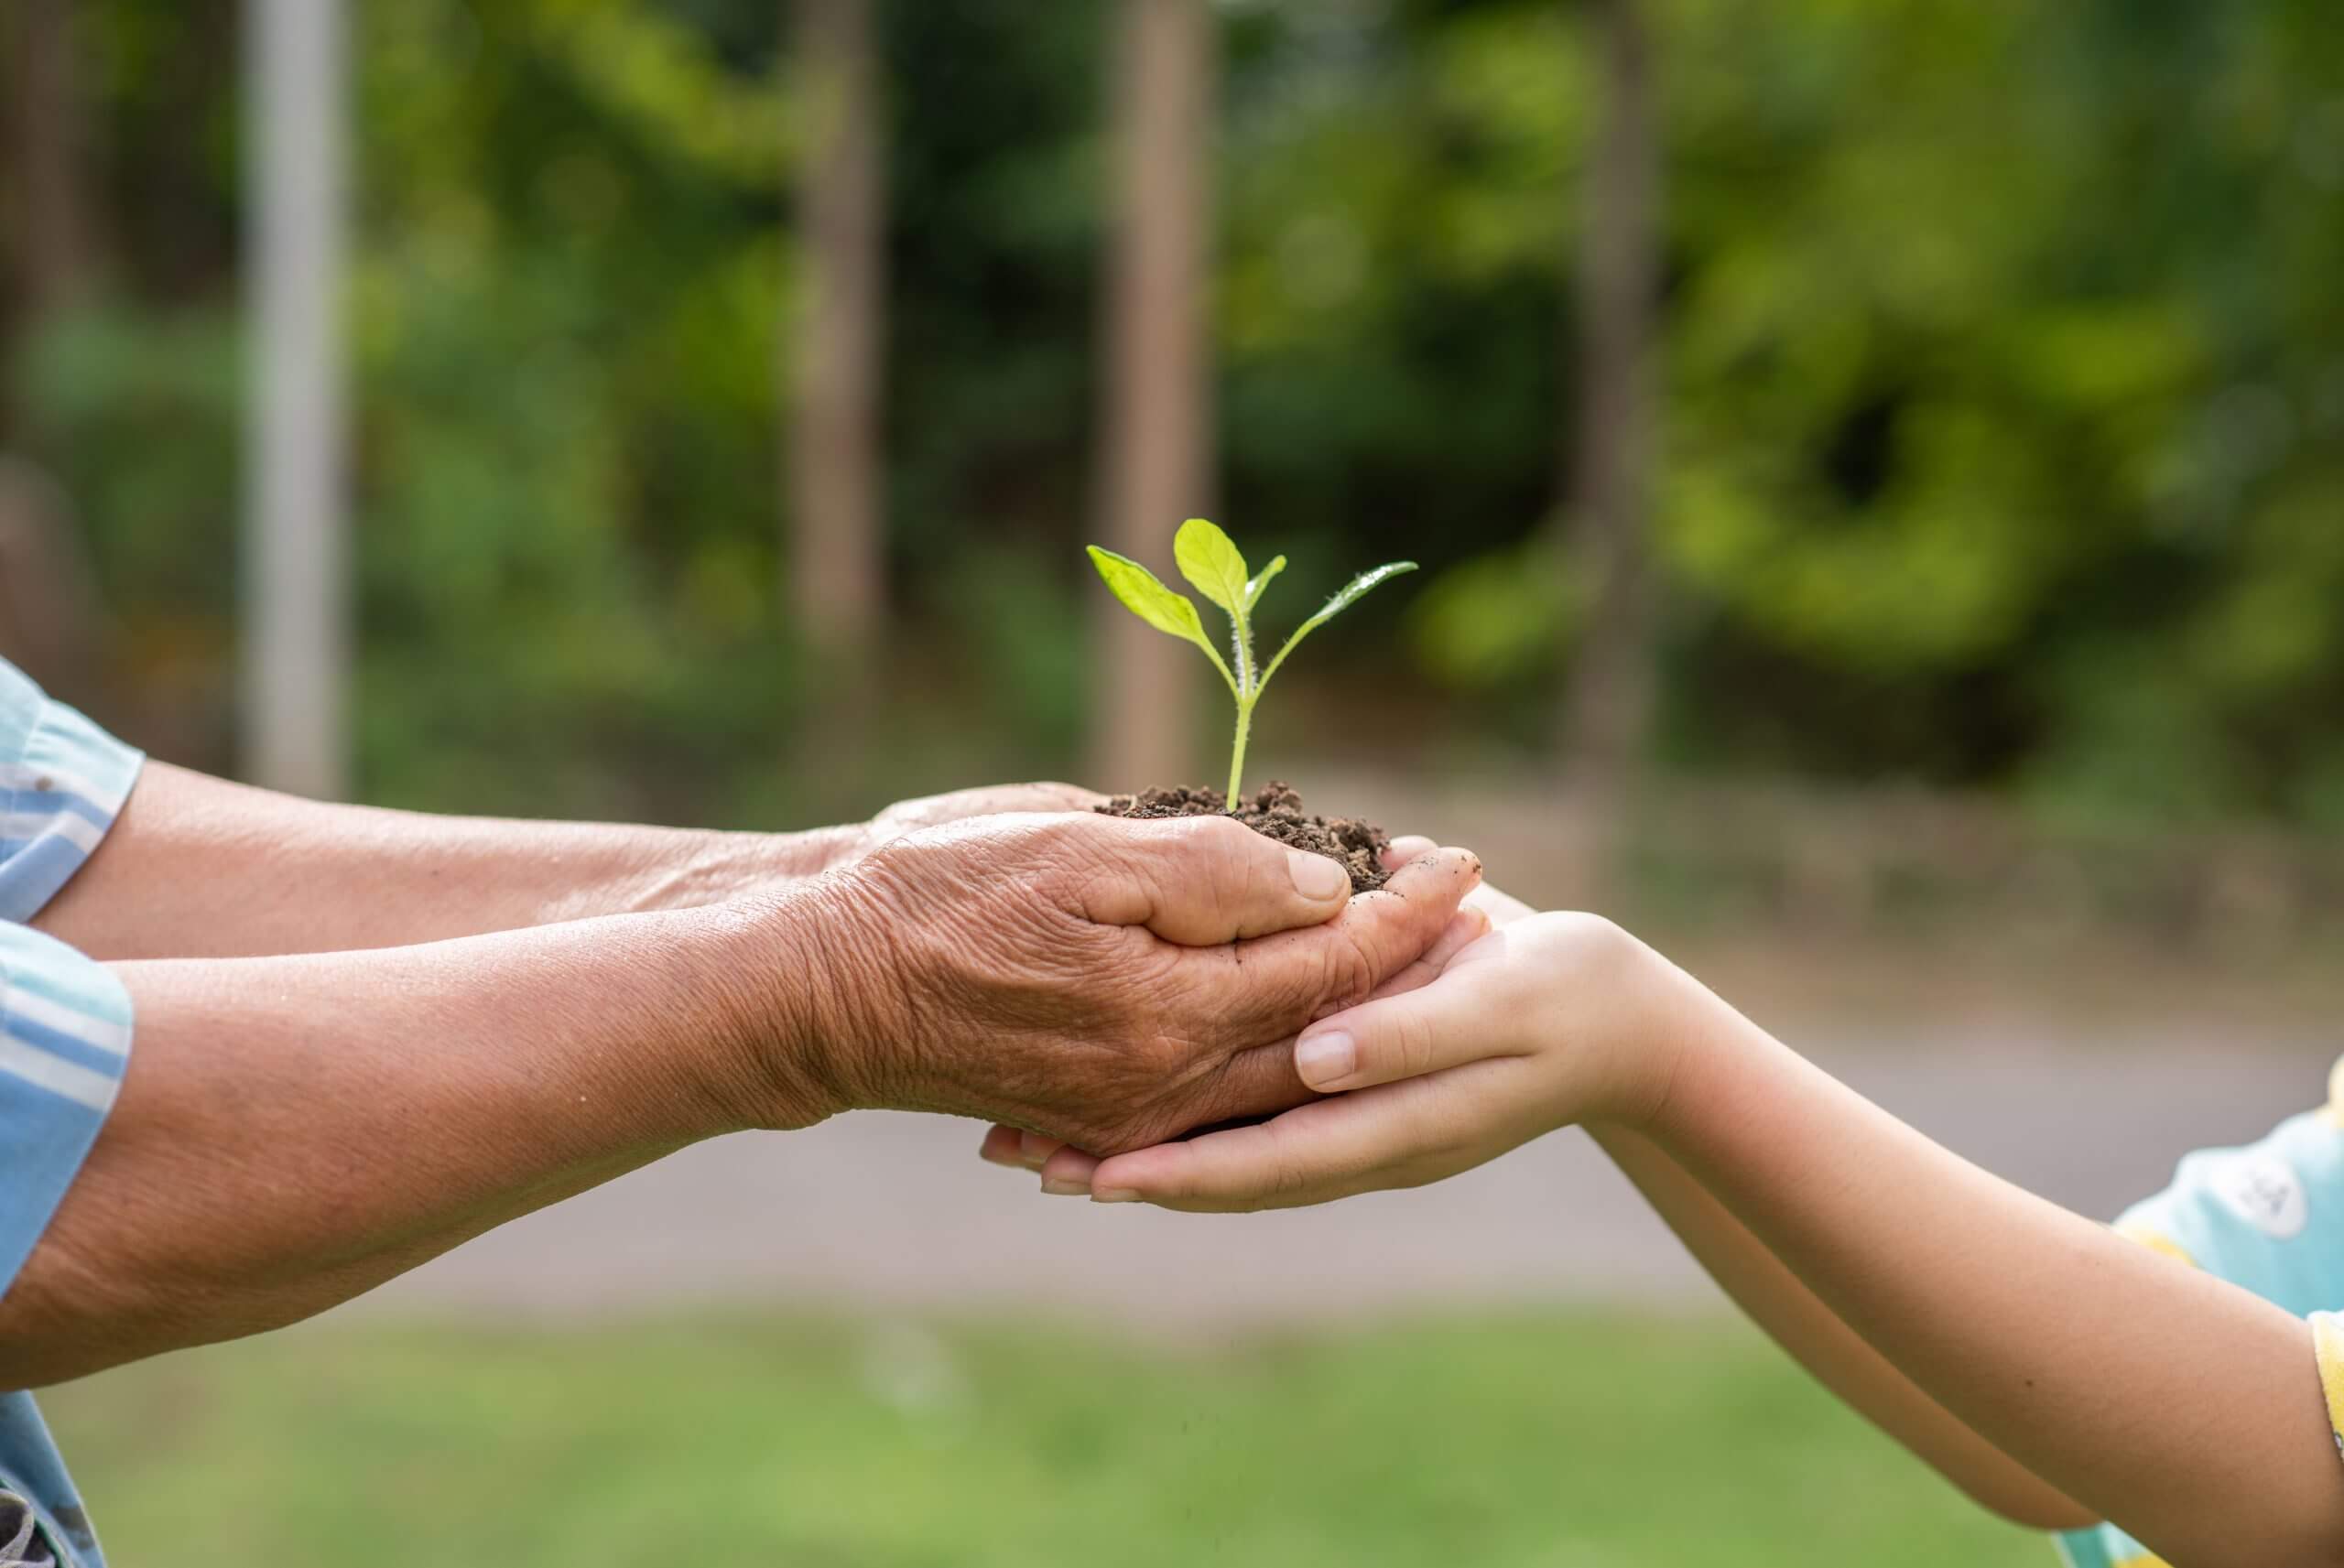 Elderly woman with wrinkled hands gives a green plant to a young man in sunlight, blurred green background.